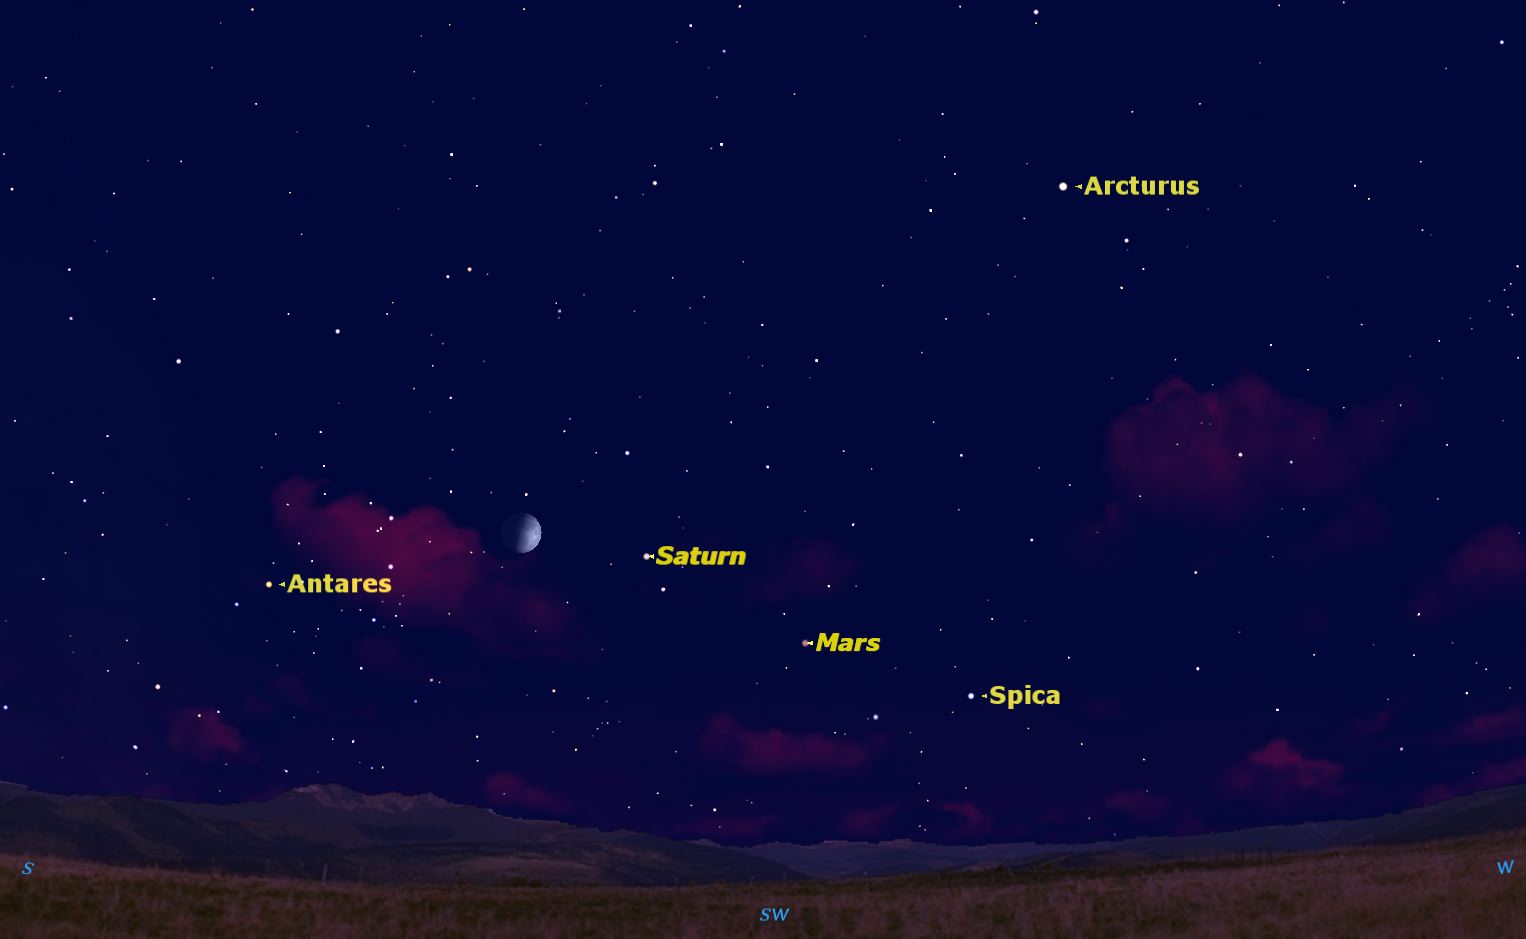 On August 4, the Moon lies between Saturn and Antares. Credit: Starry Night software.